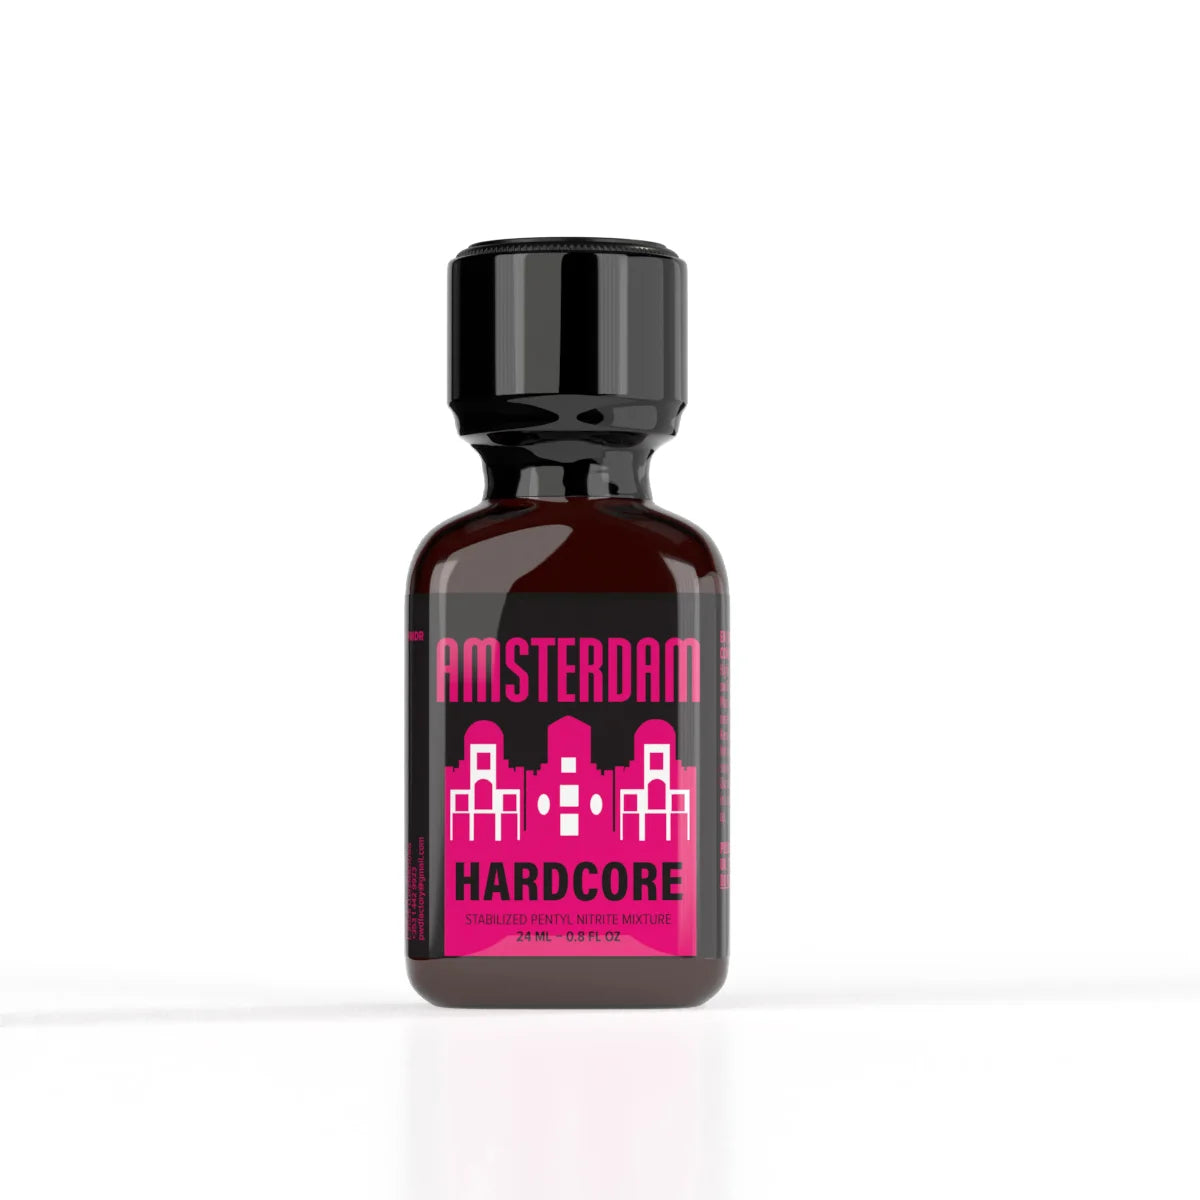 A product photo of Amsterdam Hardcore Poppers in a 24ml bottle.